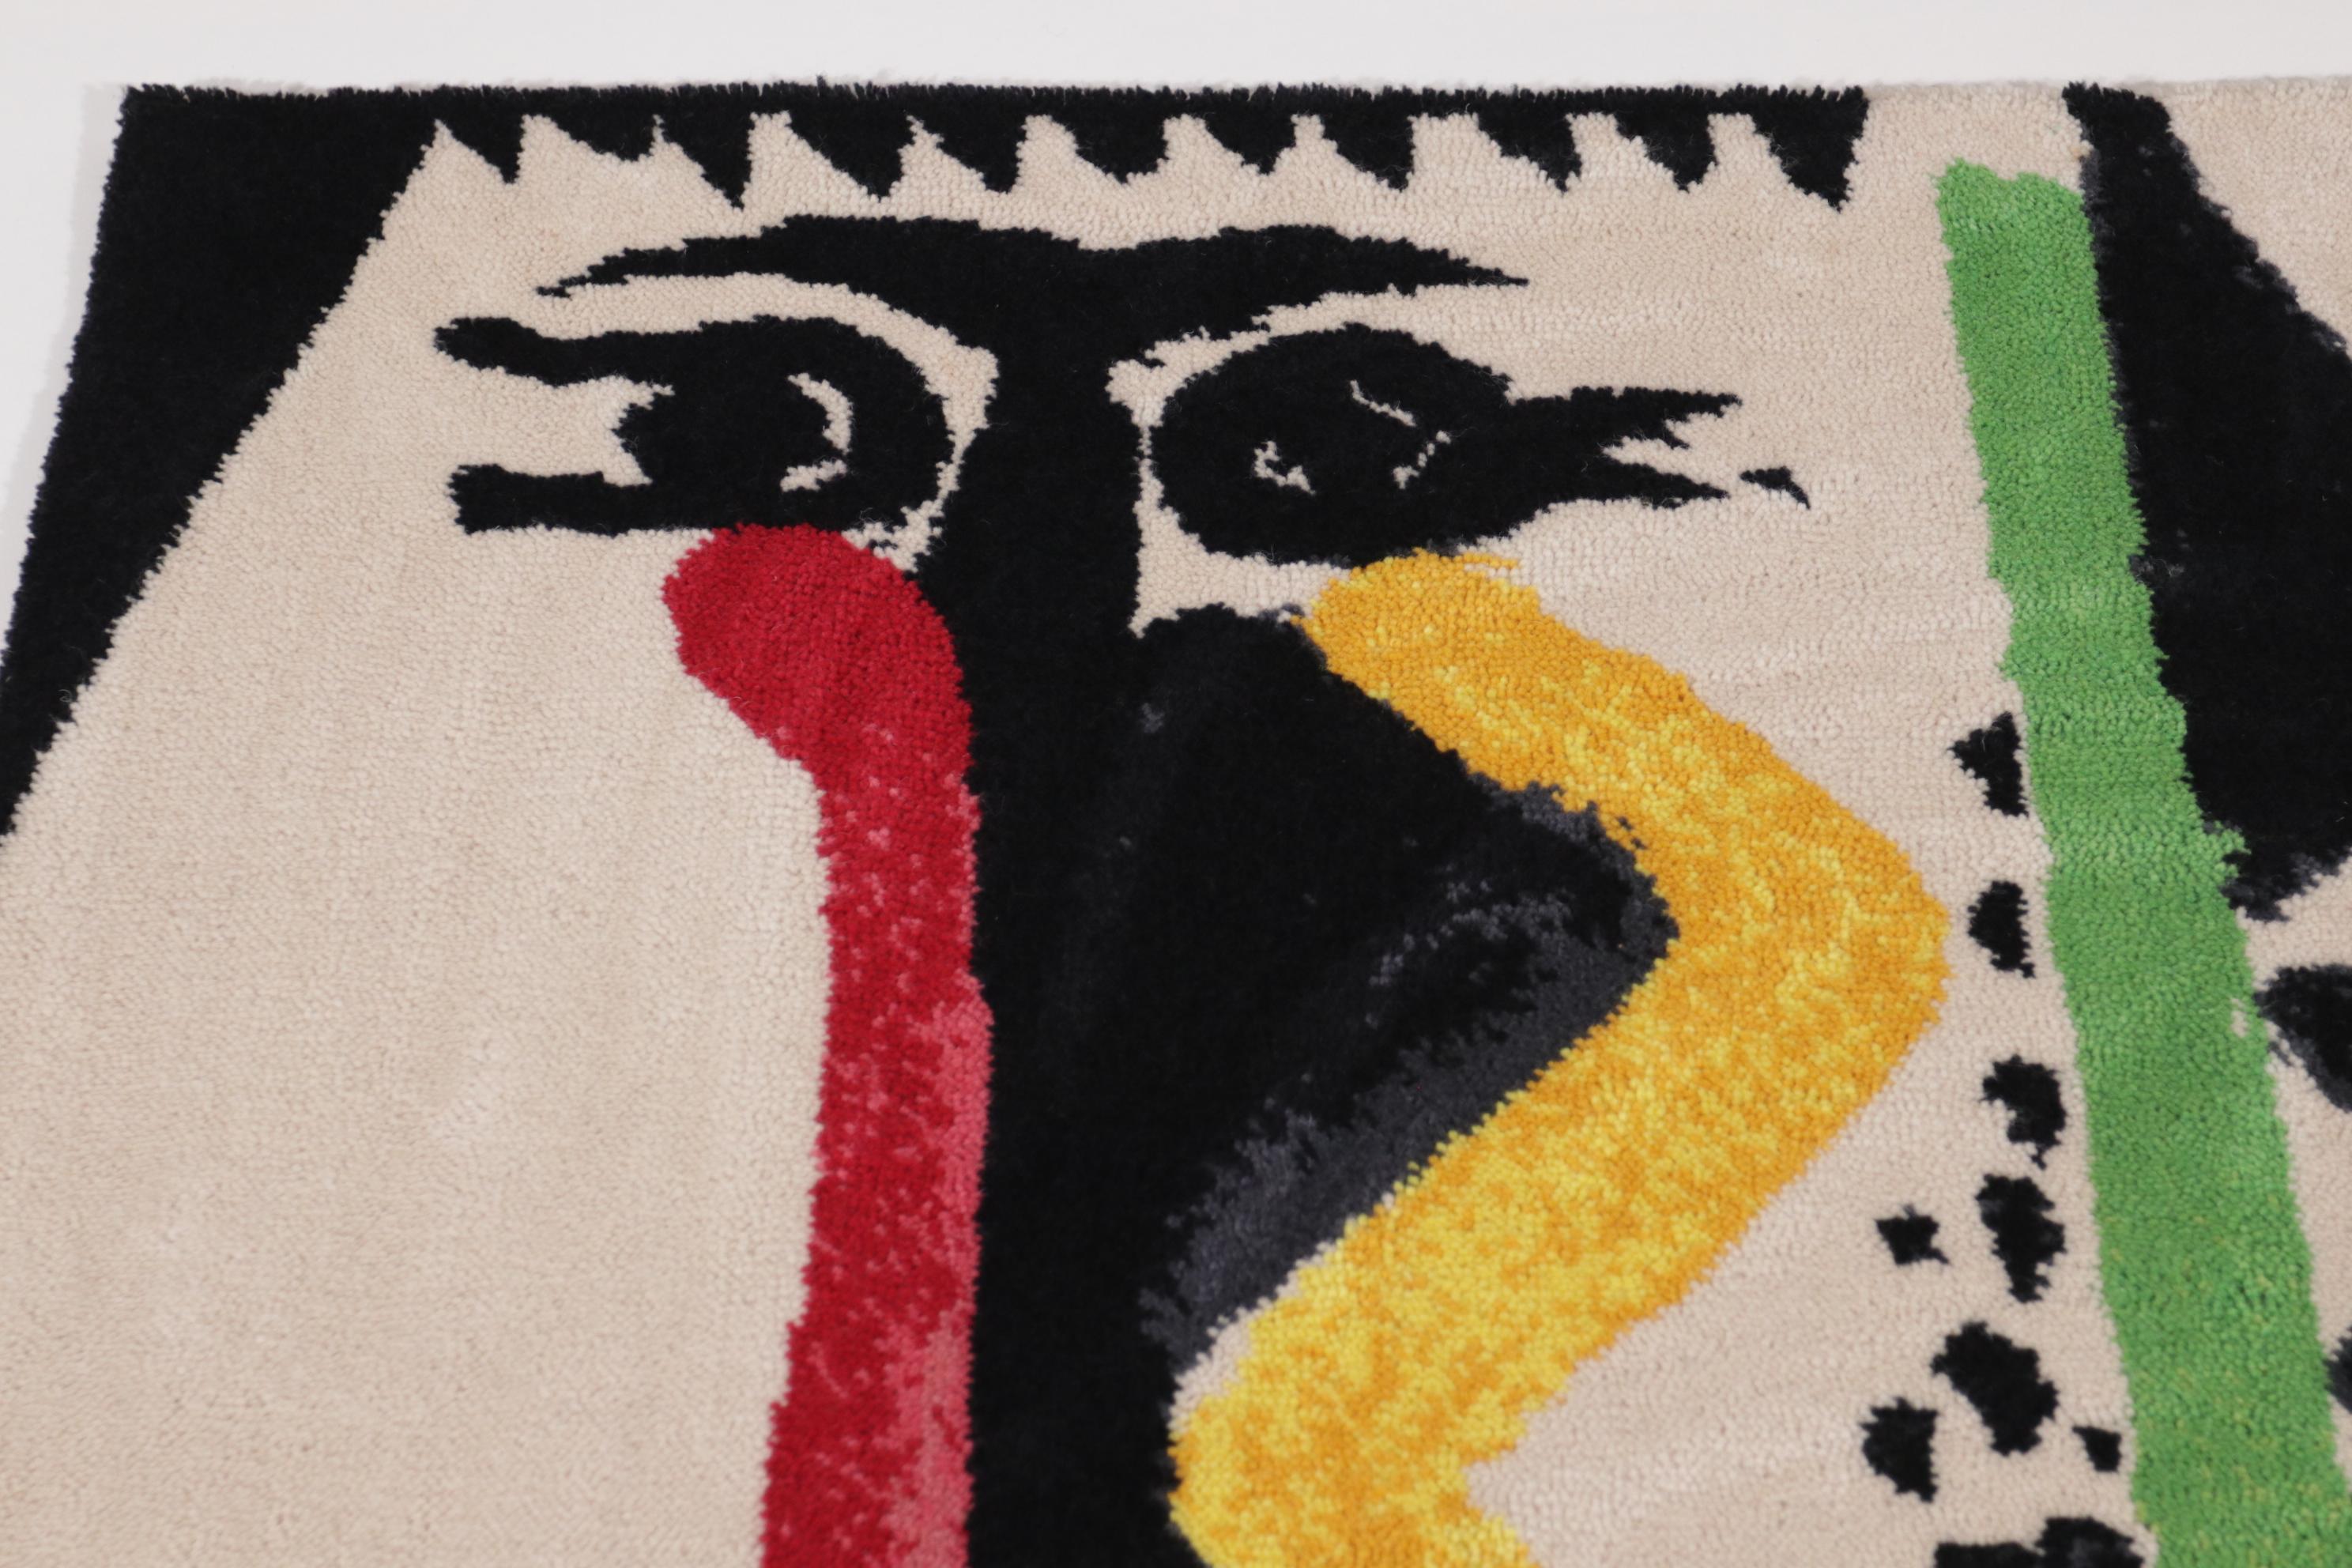 This beautiful rug was made by the Dutch brand Desso under the license of succession of Pablo Picasso. Made in a limited edition this is 219 of 500.
Name of the painting: Tête d’homme
Original Painted in: 1964
Present Location: Private